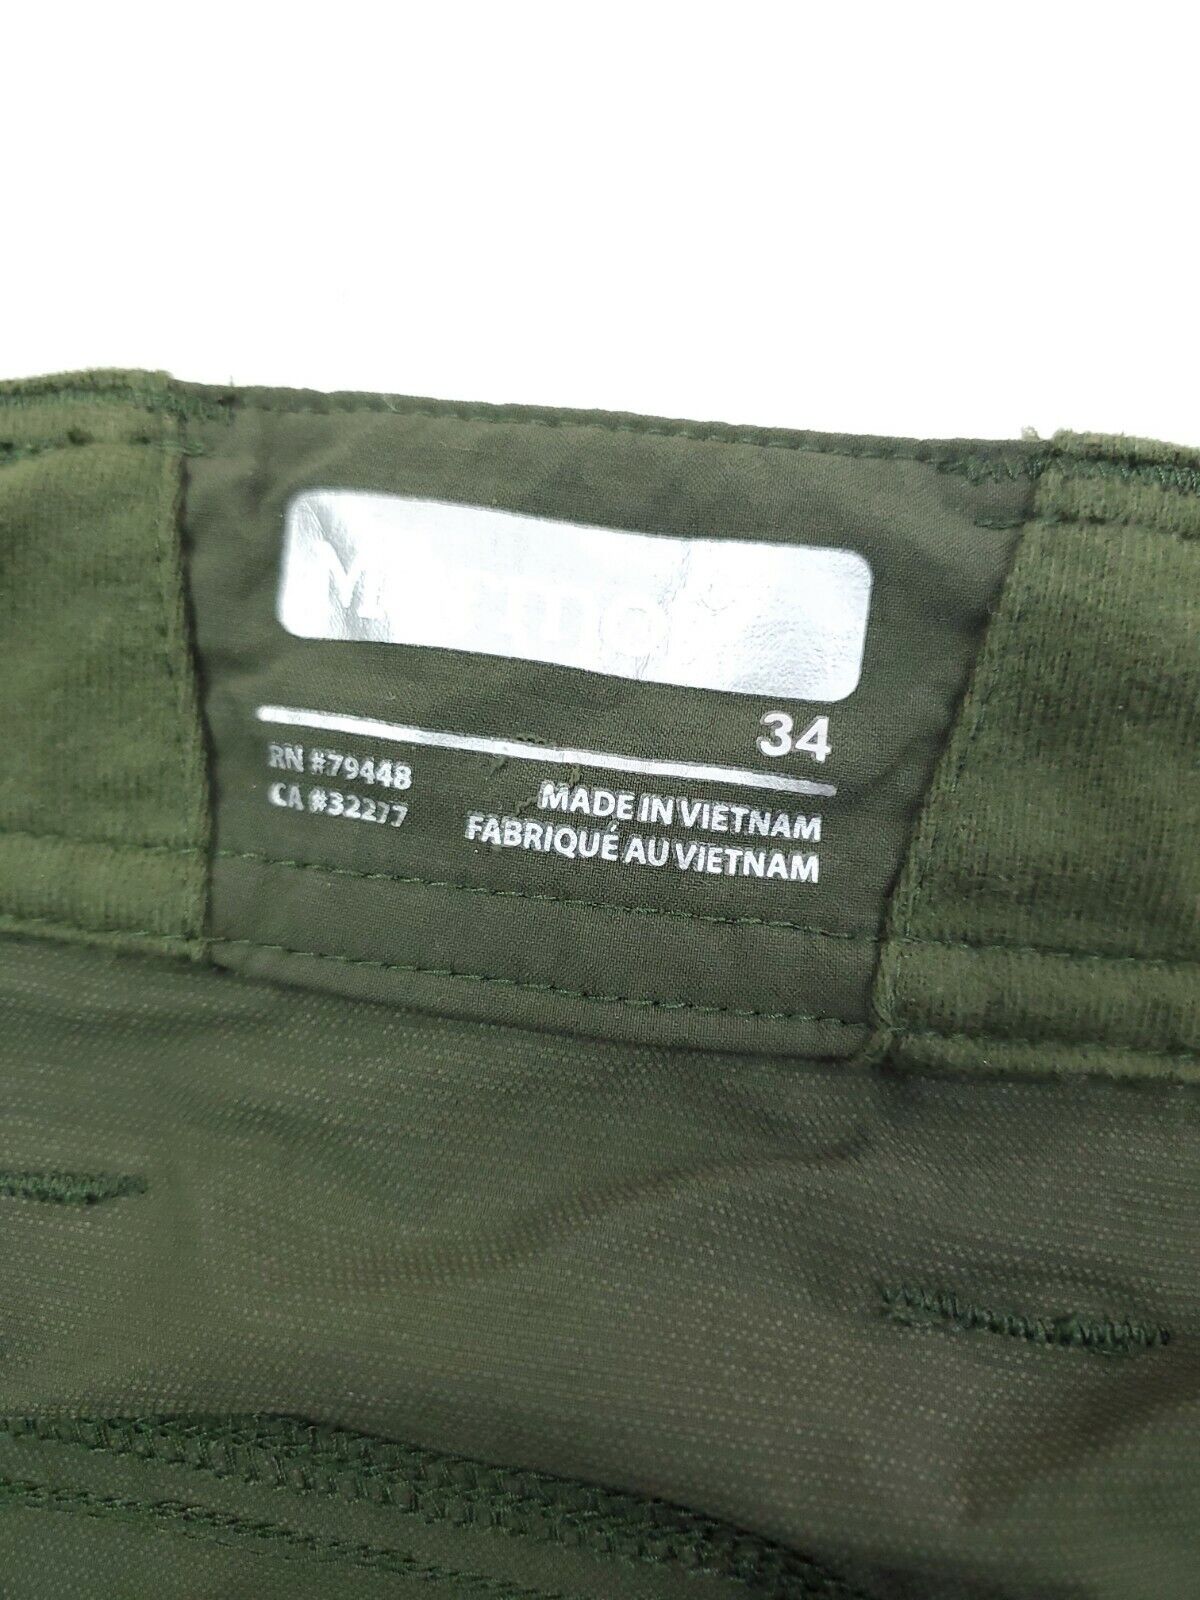 Marmot Men's Athletic / Hiking / Outdoor Pants Olive Green Size L (34) RN  79448